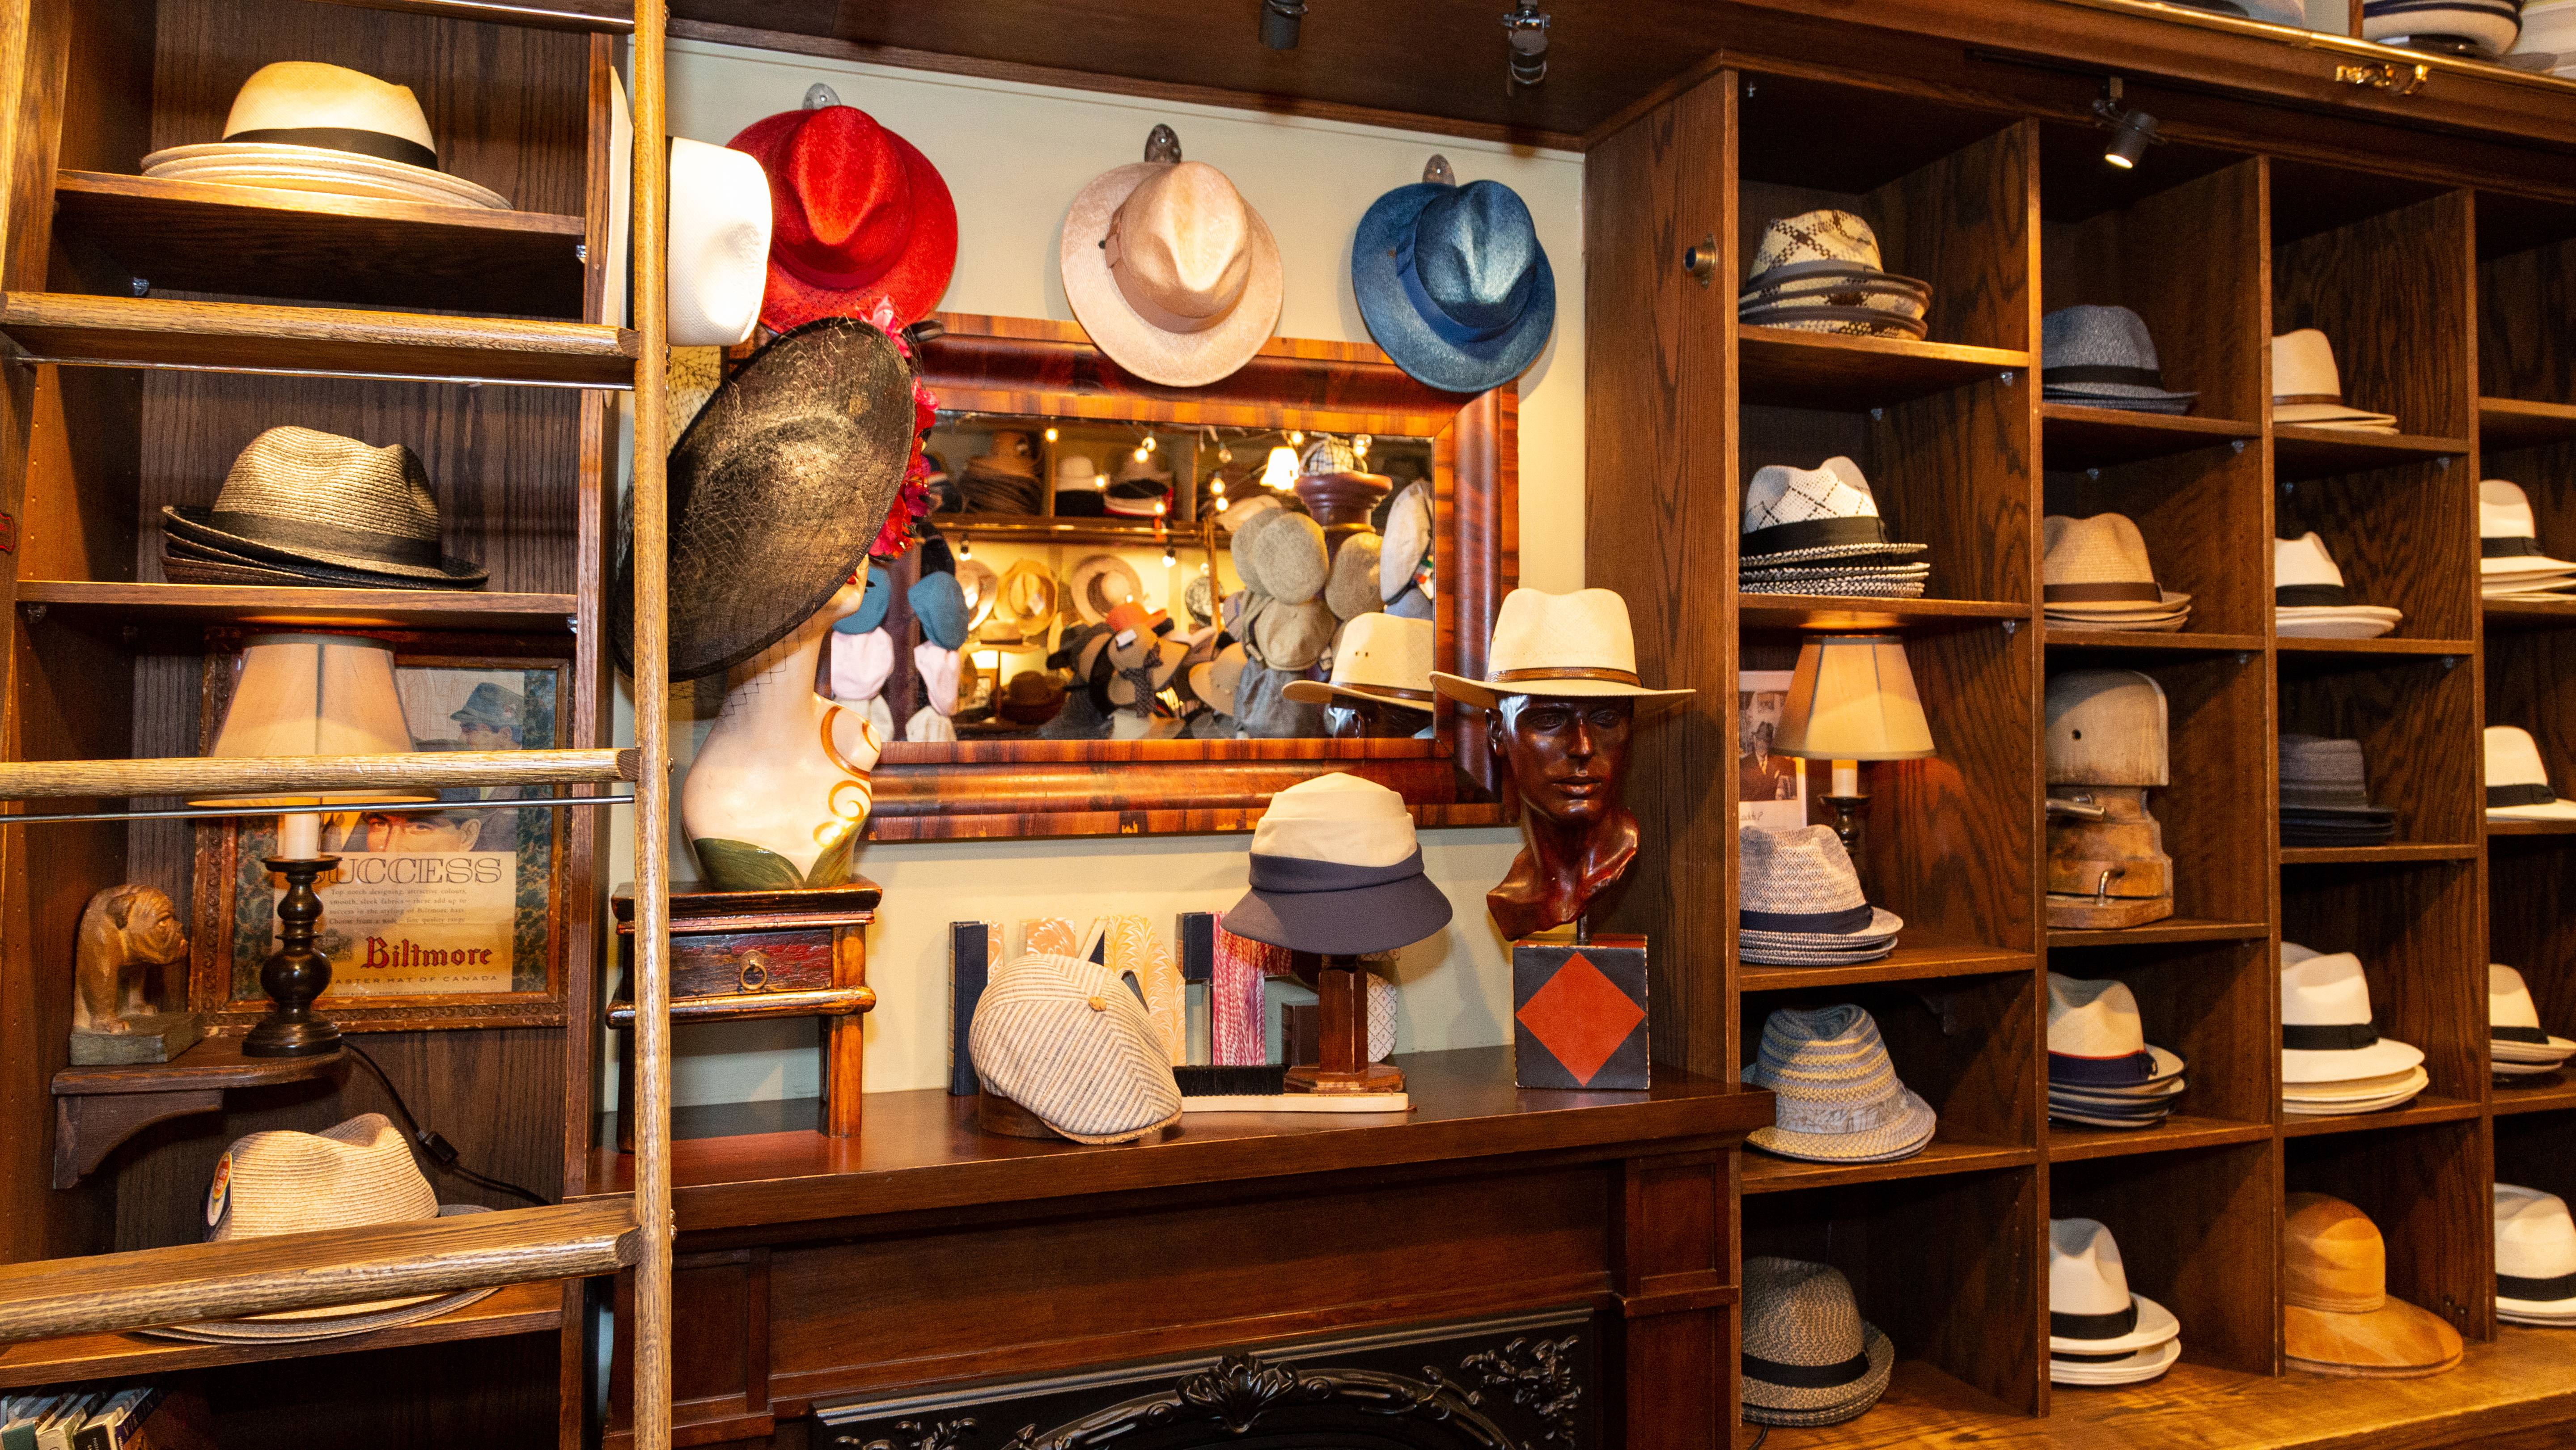 WELCOME TO THE GRANVILLE ISLAND HAT SHOP